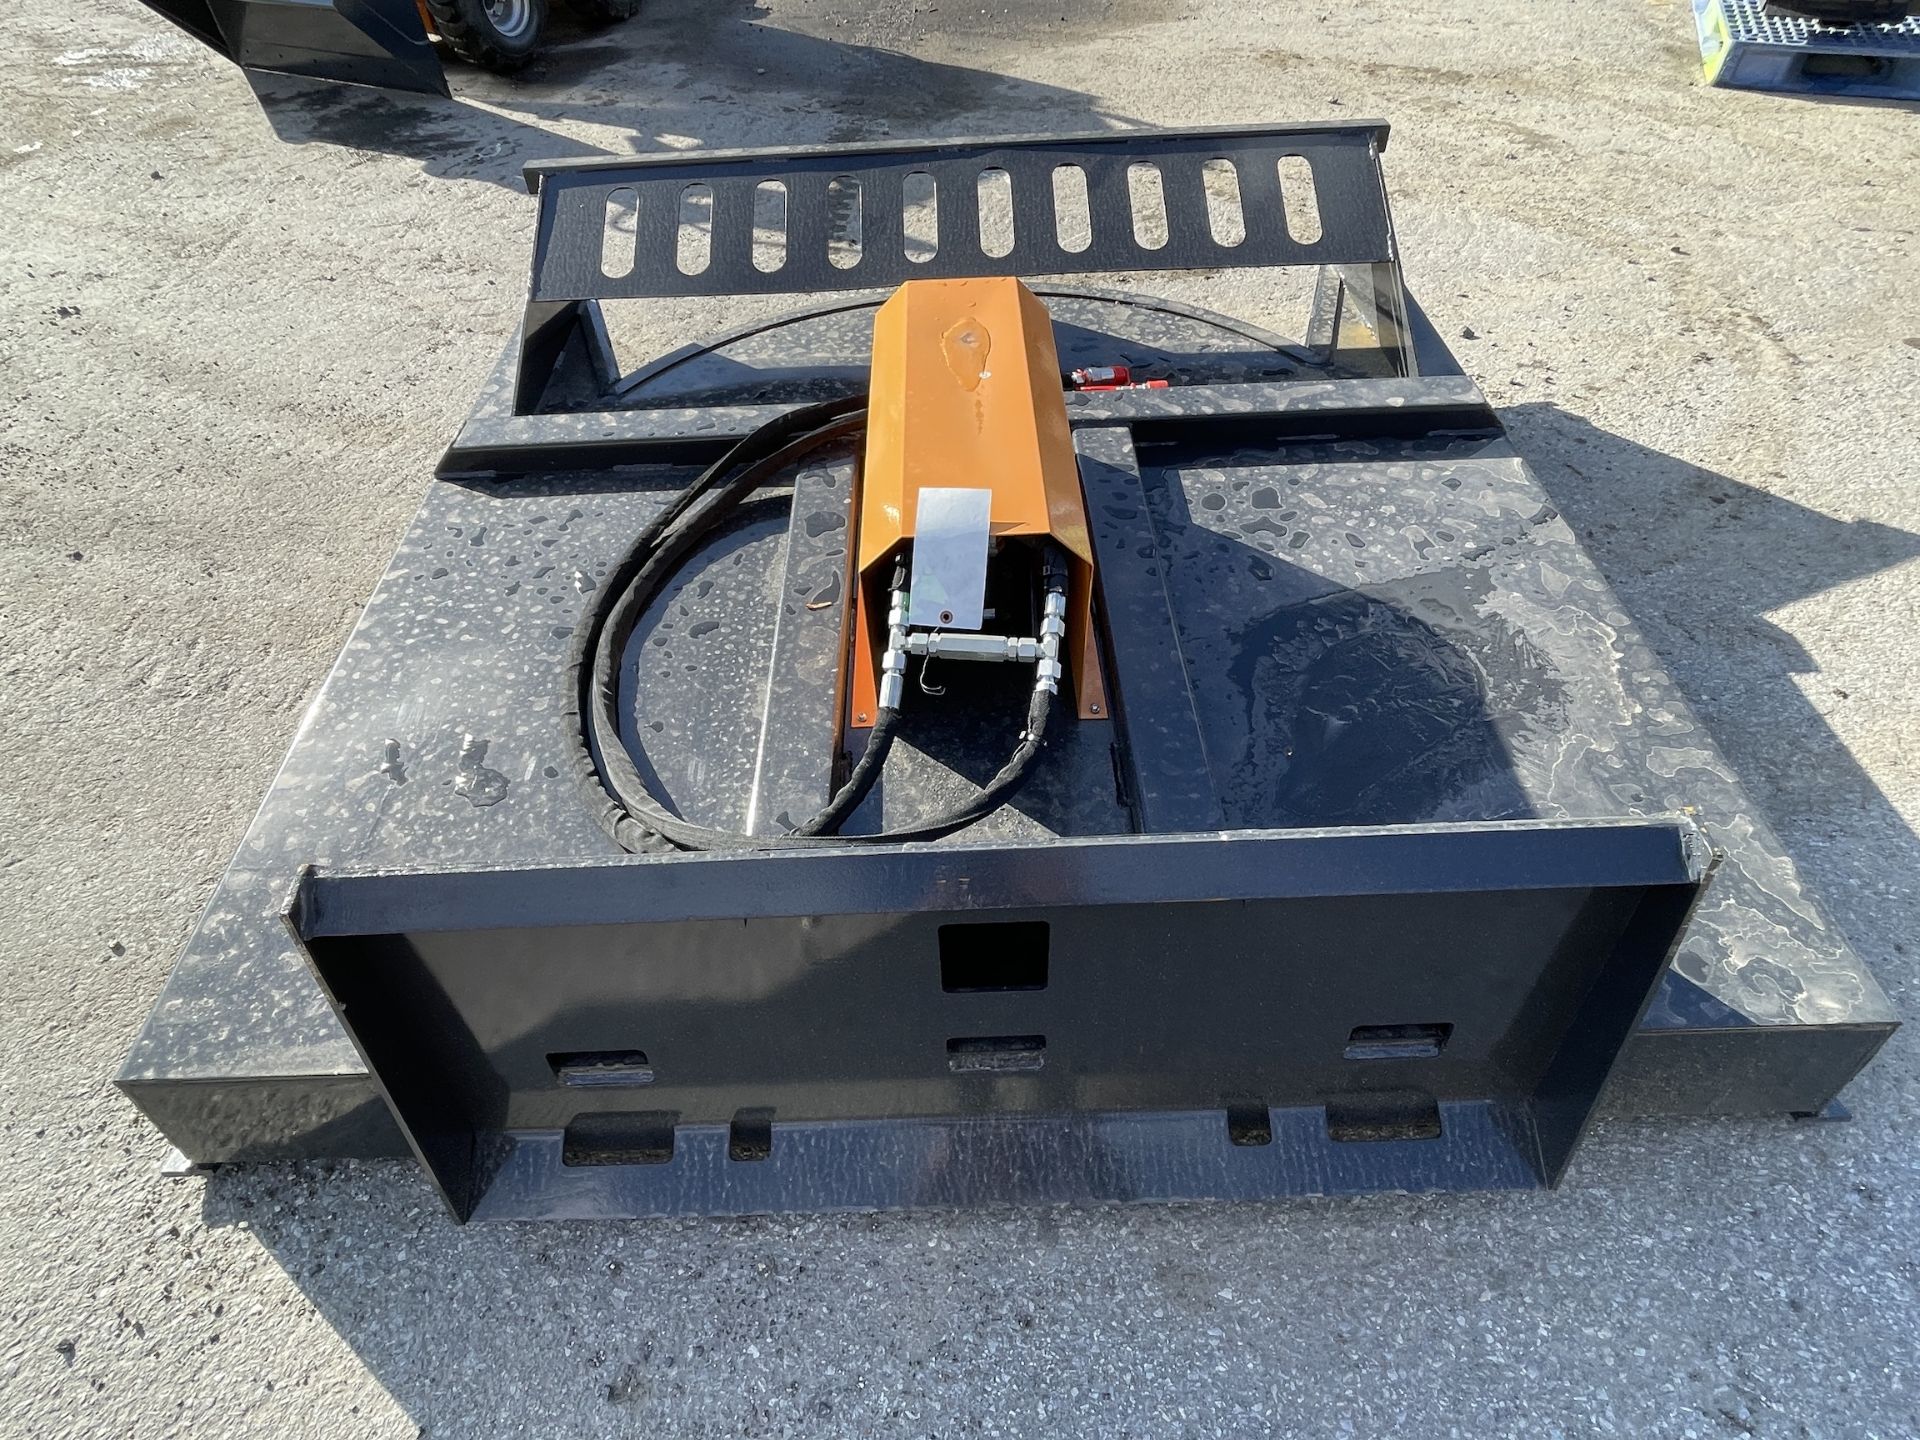 Brand New 72" Skid Steer Brush Cutter Attachment (C423E) - Image 2 of 10